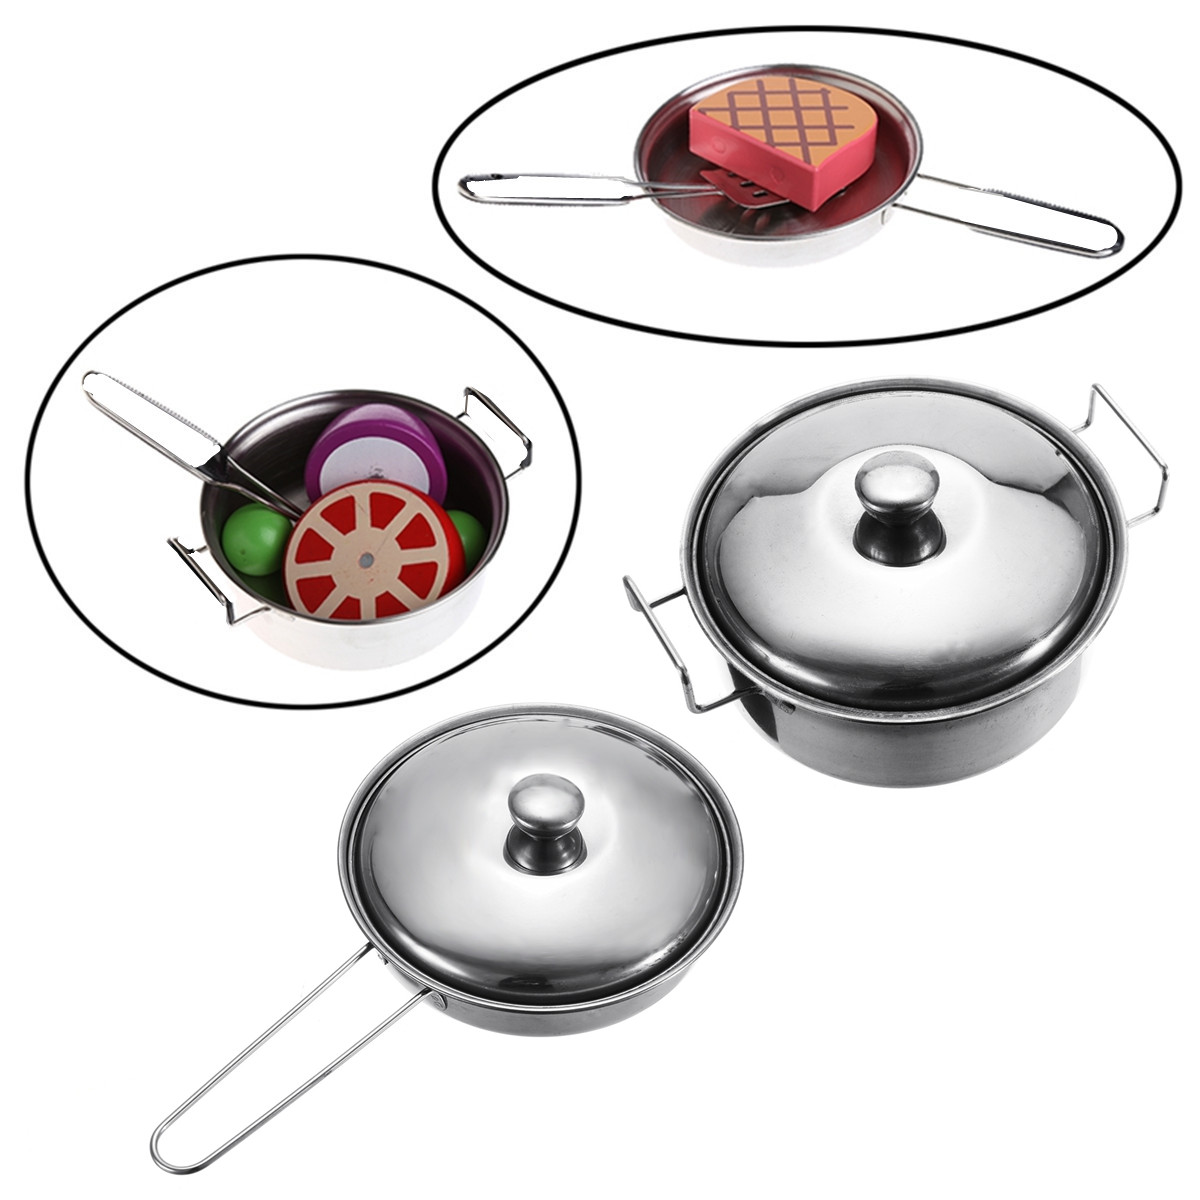 10pc-Stainless-steel-Cookware-Kitchen-Cooking-Set-Pot-Pans-House-Play-Toy-For-Children-1418086-3